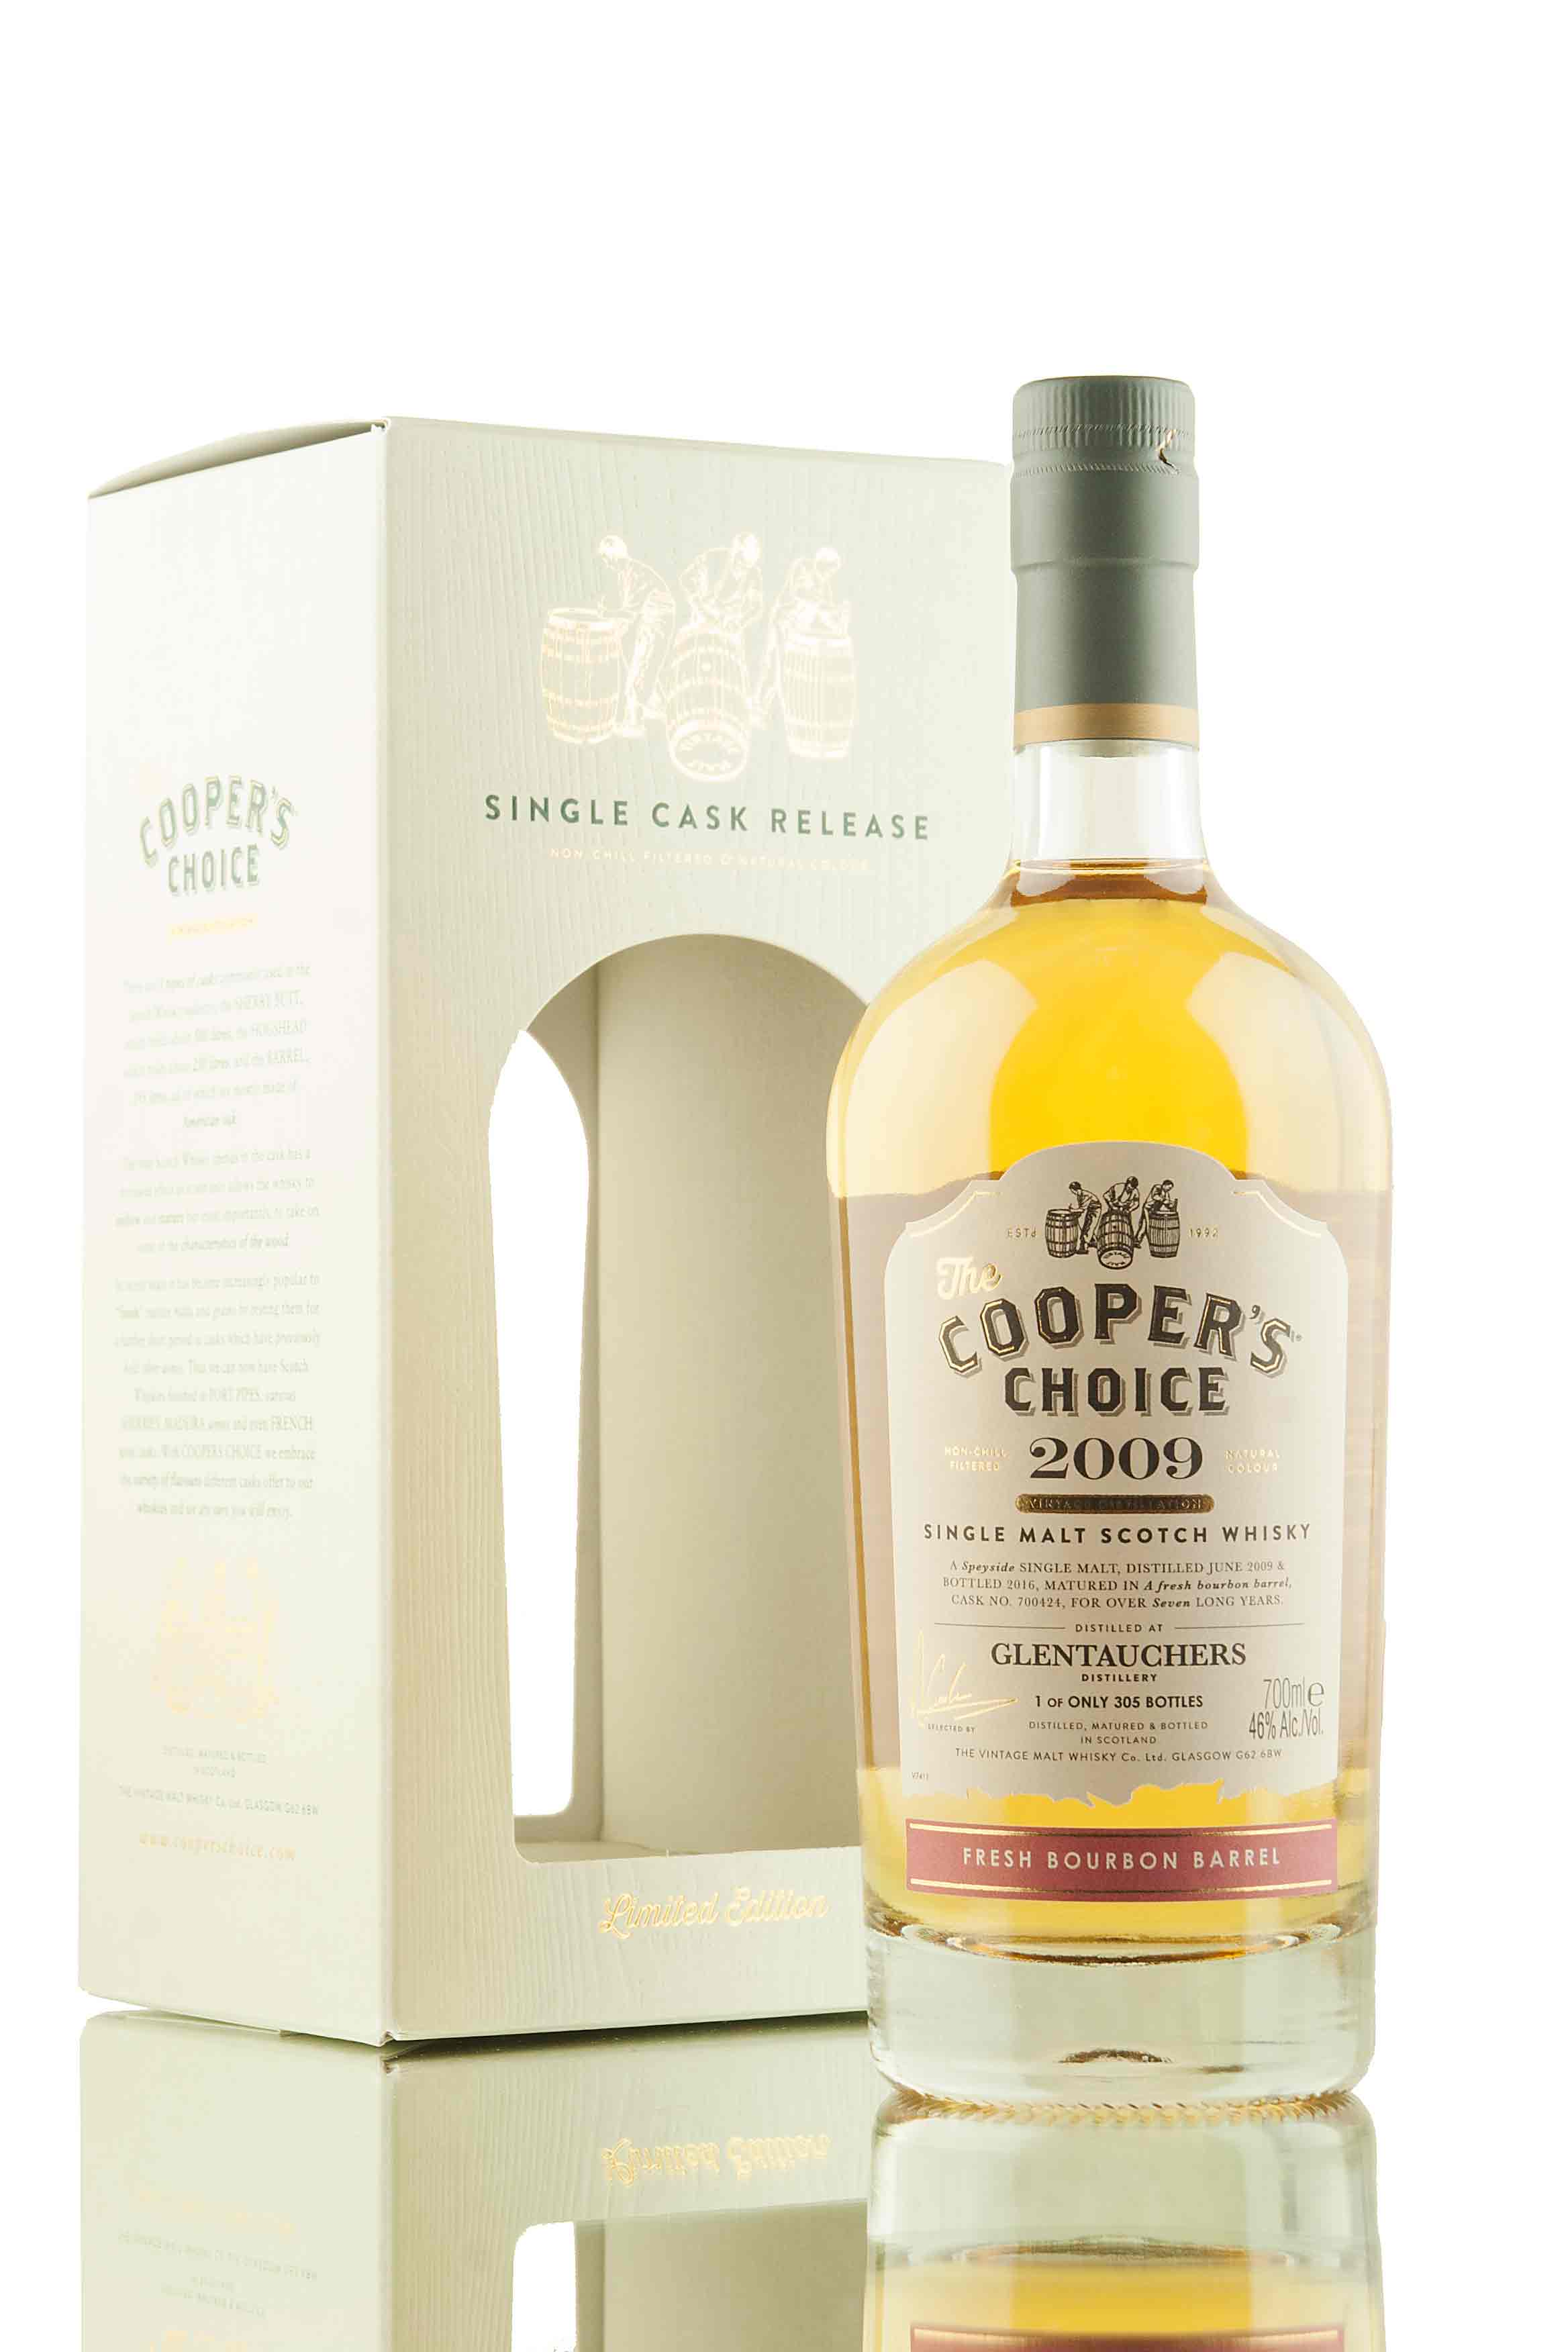 Glentauchers 7 Year Old - 2009 | Cask 700424 | The Cooper's Choice